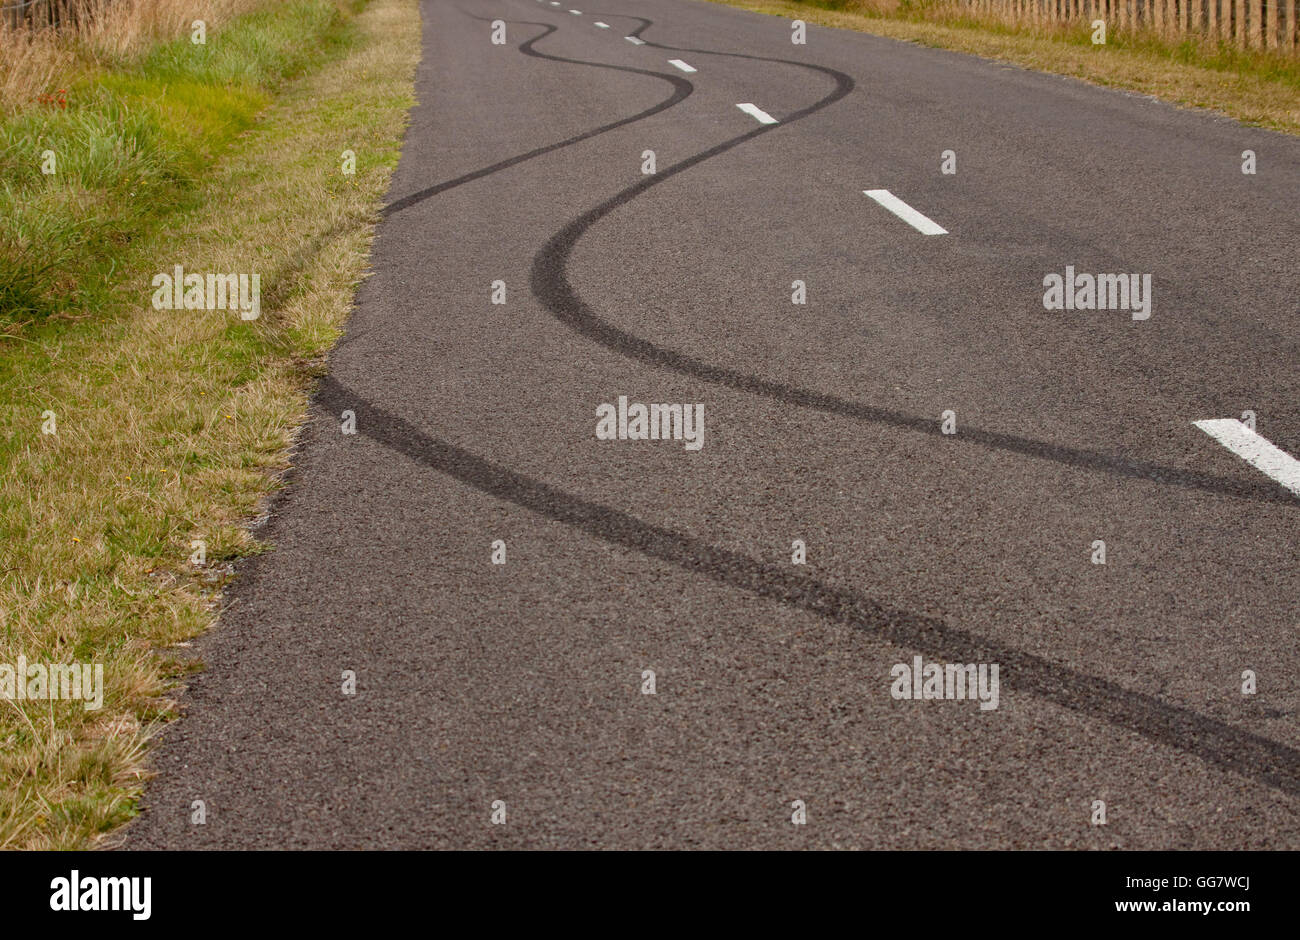 tyre skid marks on road Stock Photo